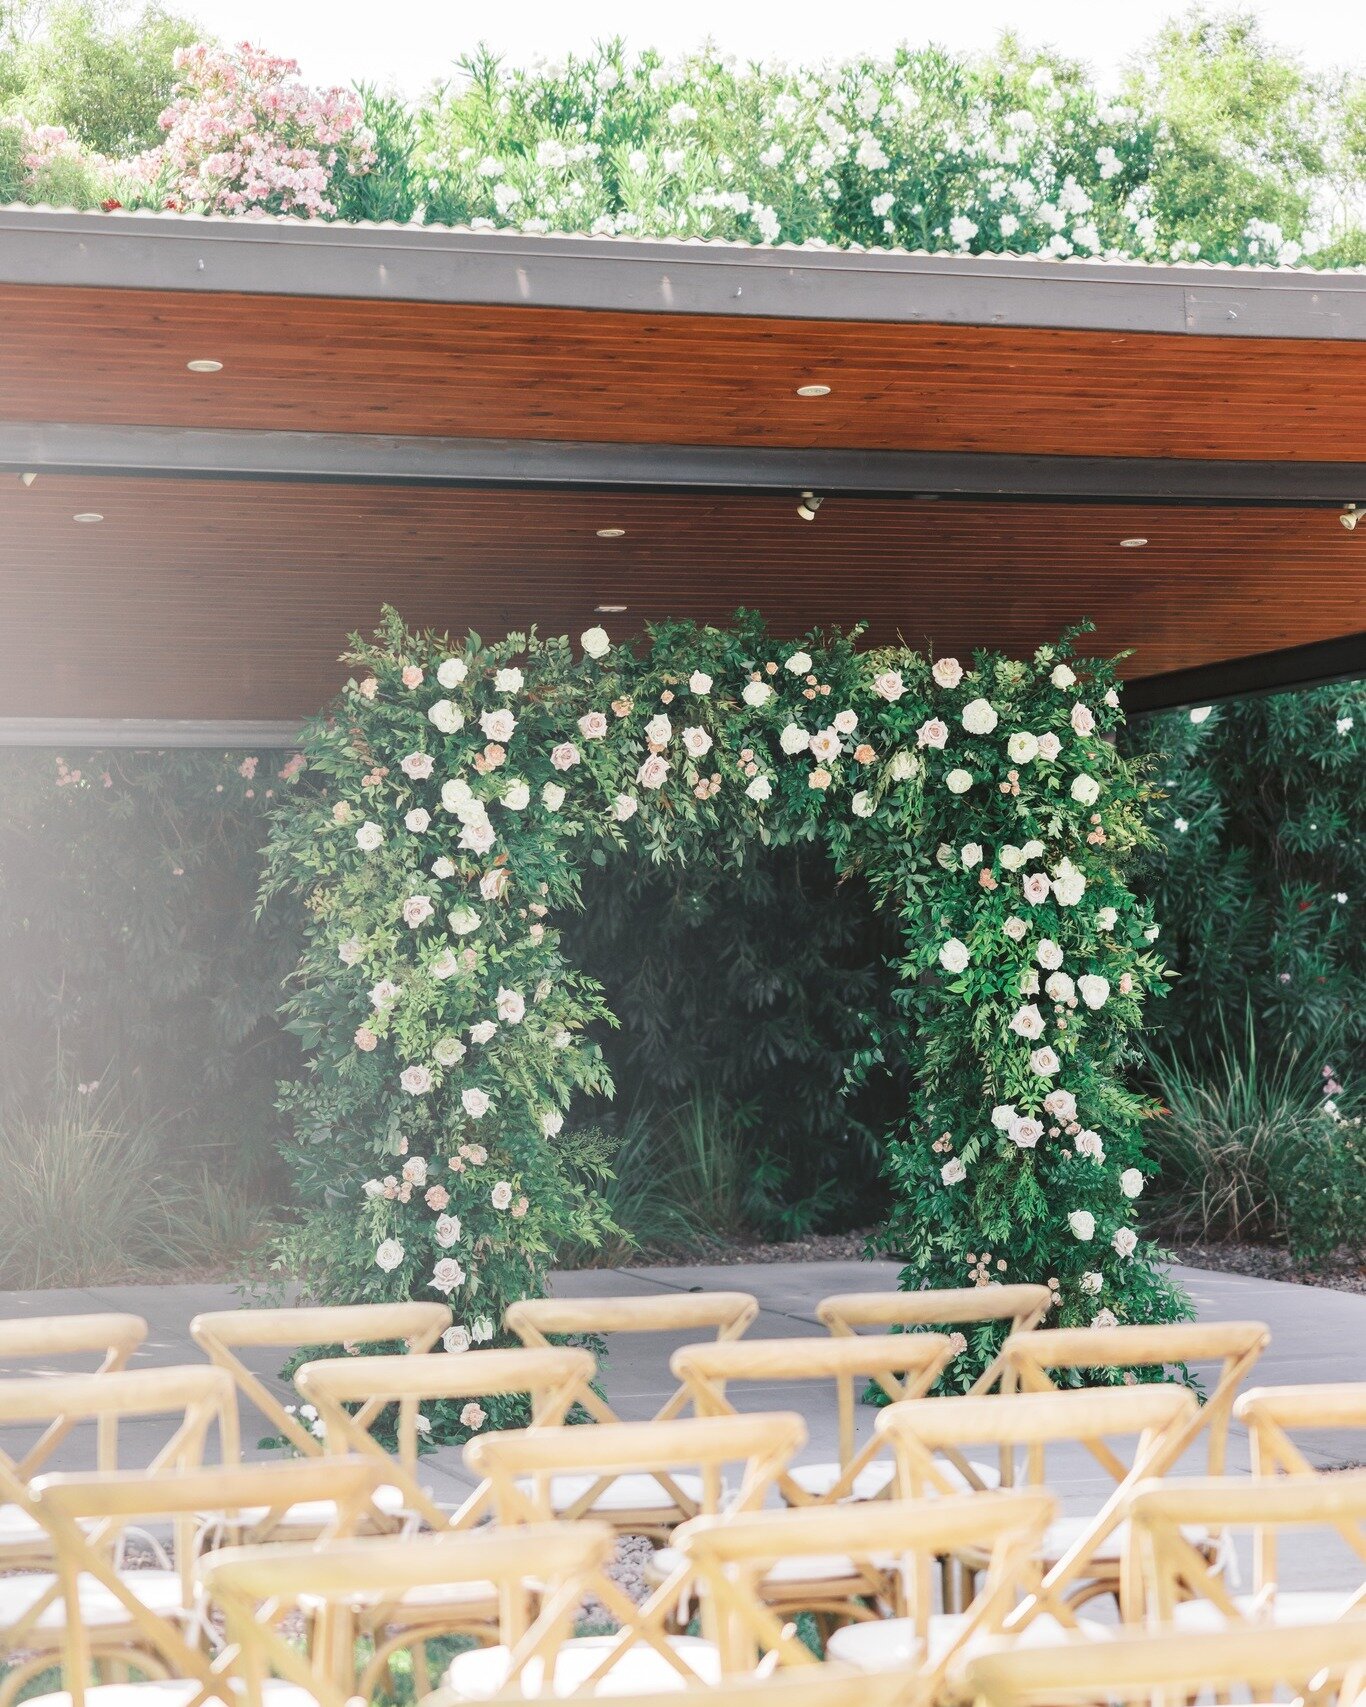 A moment for our Pergola ceremony location during Spring 🌷🌿

I mean....you can't beat all the natural flowers and lush greenery anywhere else in Las Vegas 🌸

If you'd like to come see for yourself, feel free to give us a phone call or reach out to